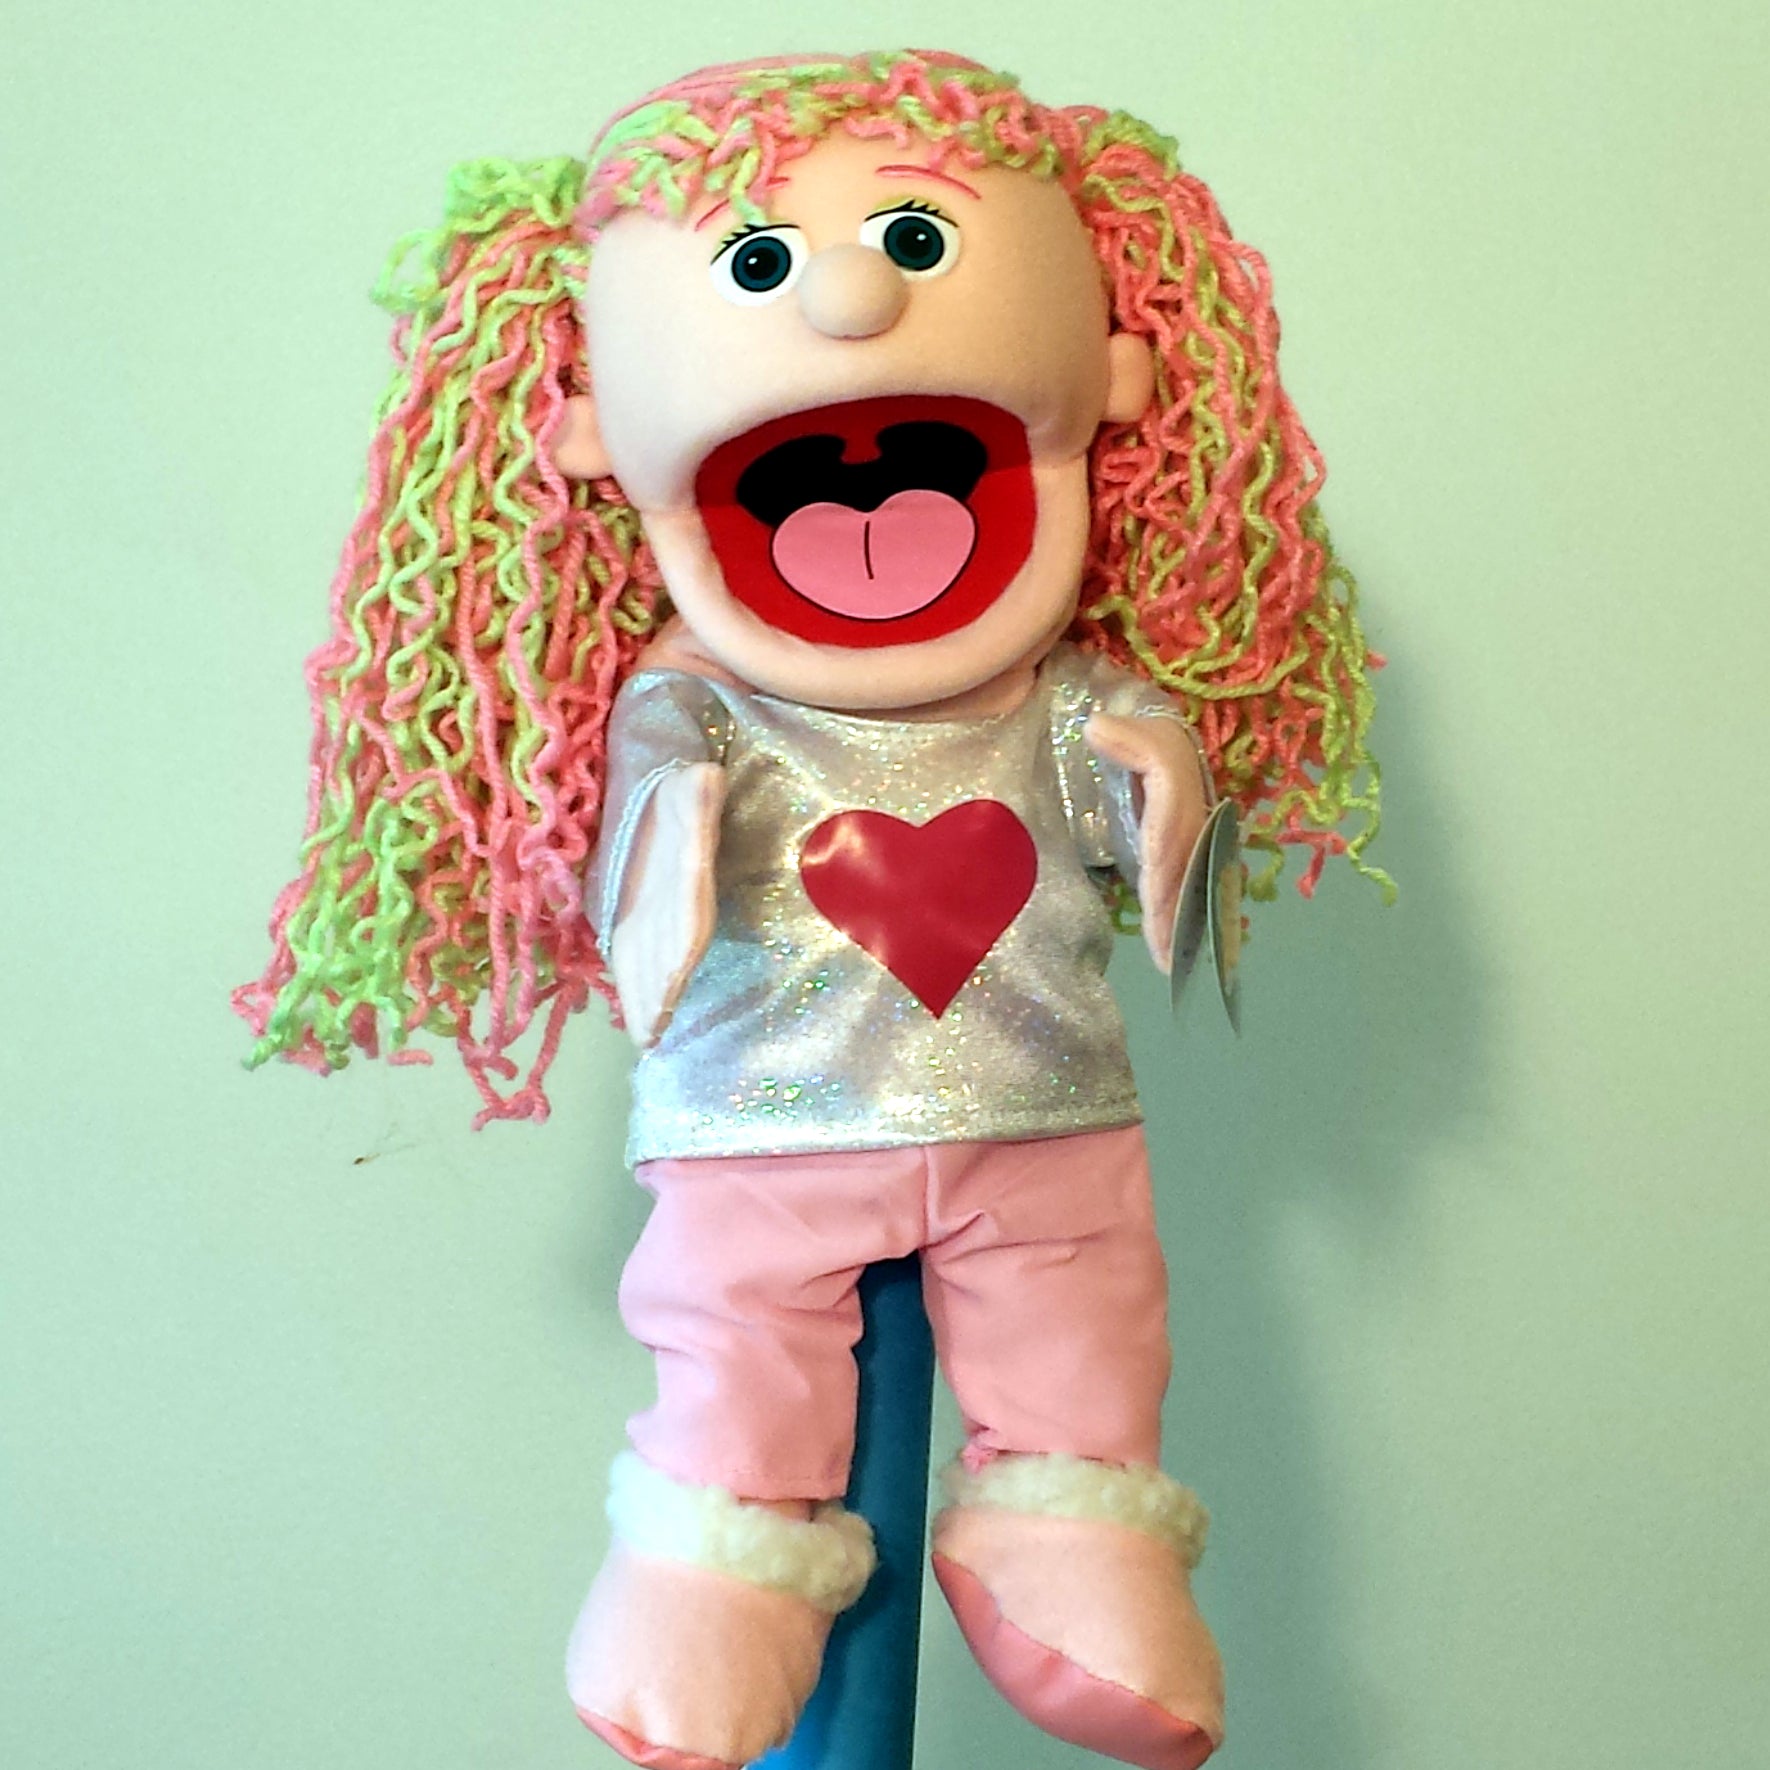 Silly Puppets Kimmie 14 - Fun Stuff Toys